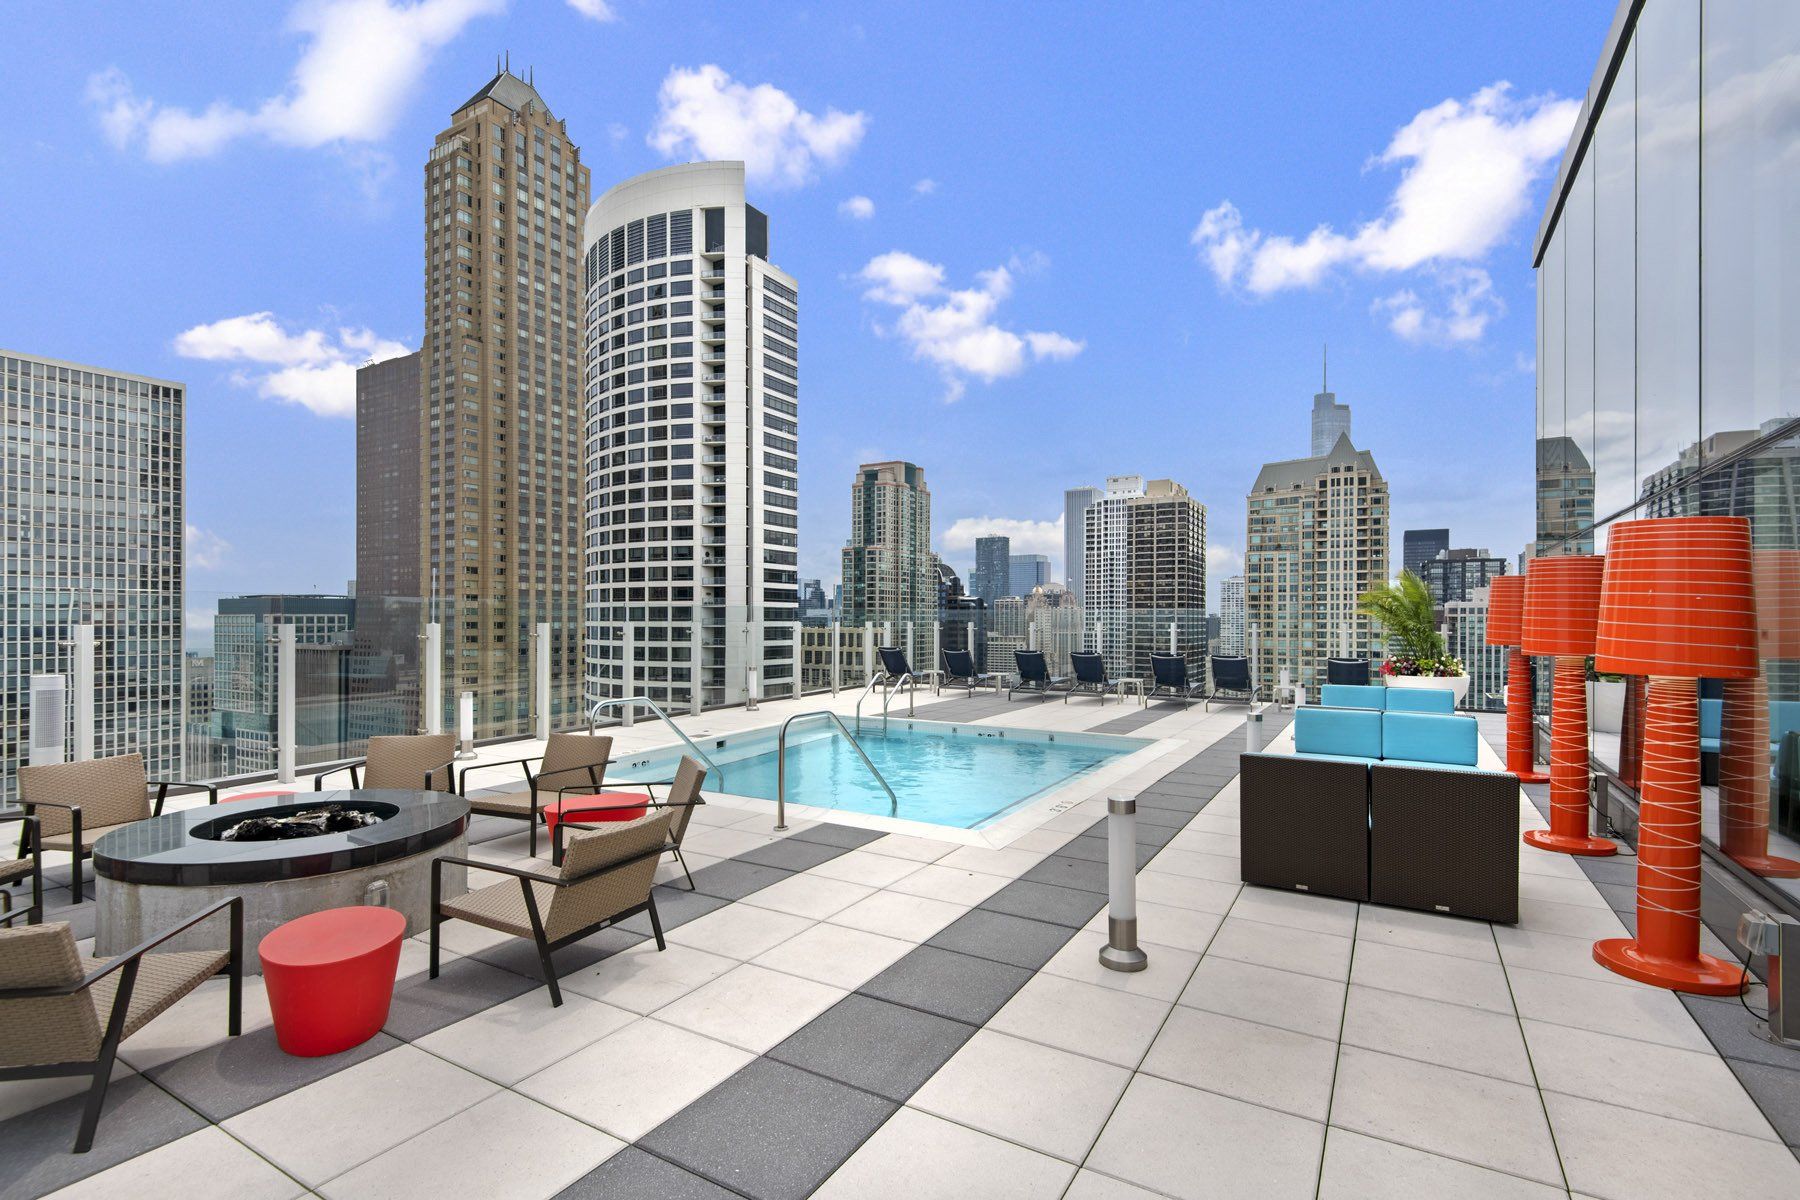 A rooftop patio with a swimming pool and a table and chairs at State & Chestnut.